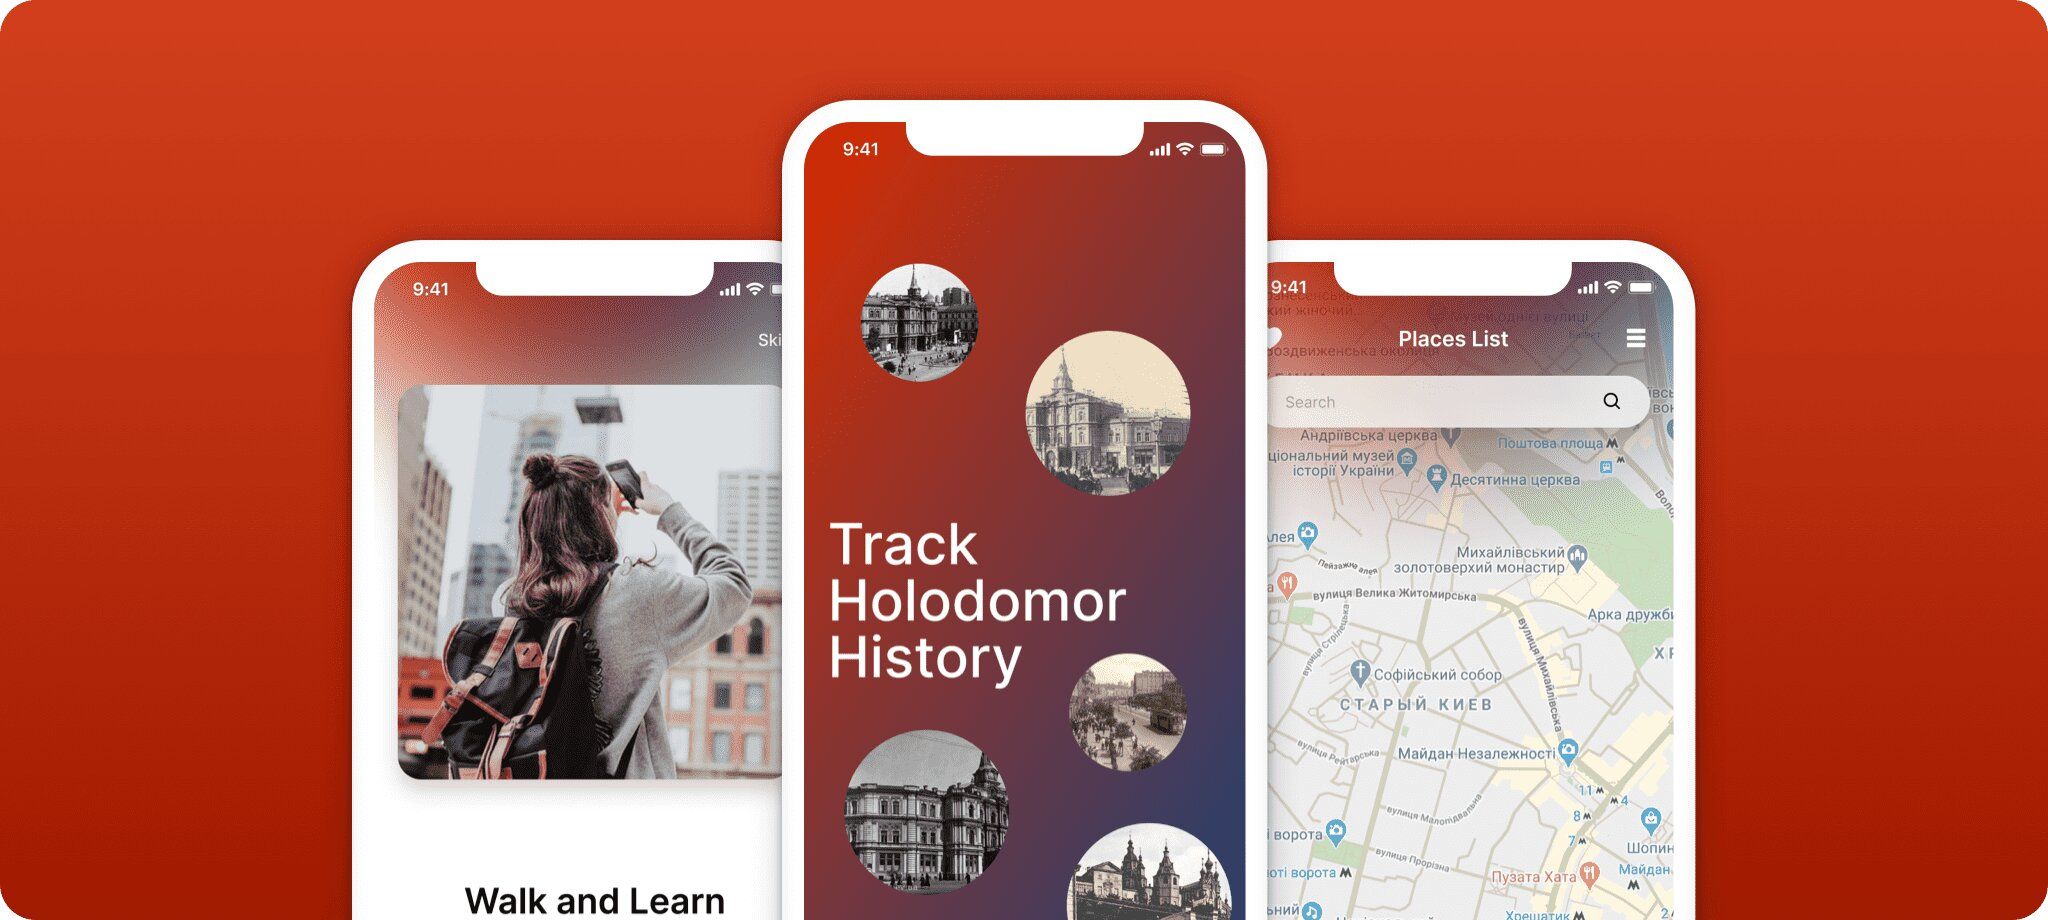 Track Holodomor History app provides great tours all around Kyiv &amp; an interactive history learning experience (*image by [Stormotion](https://stormotion.io/){ rel="nofollow" target="_blank" .default-md}*)